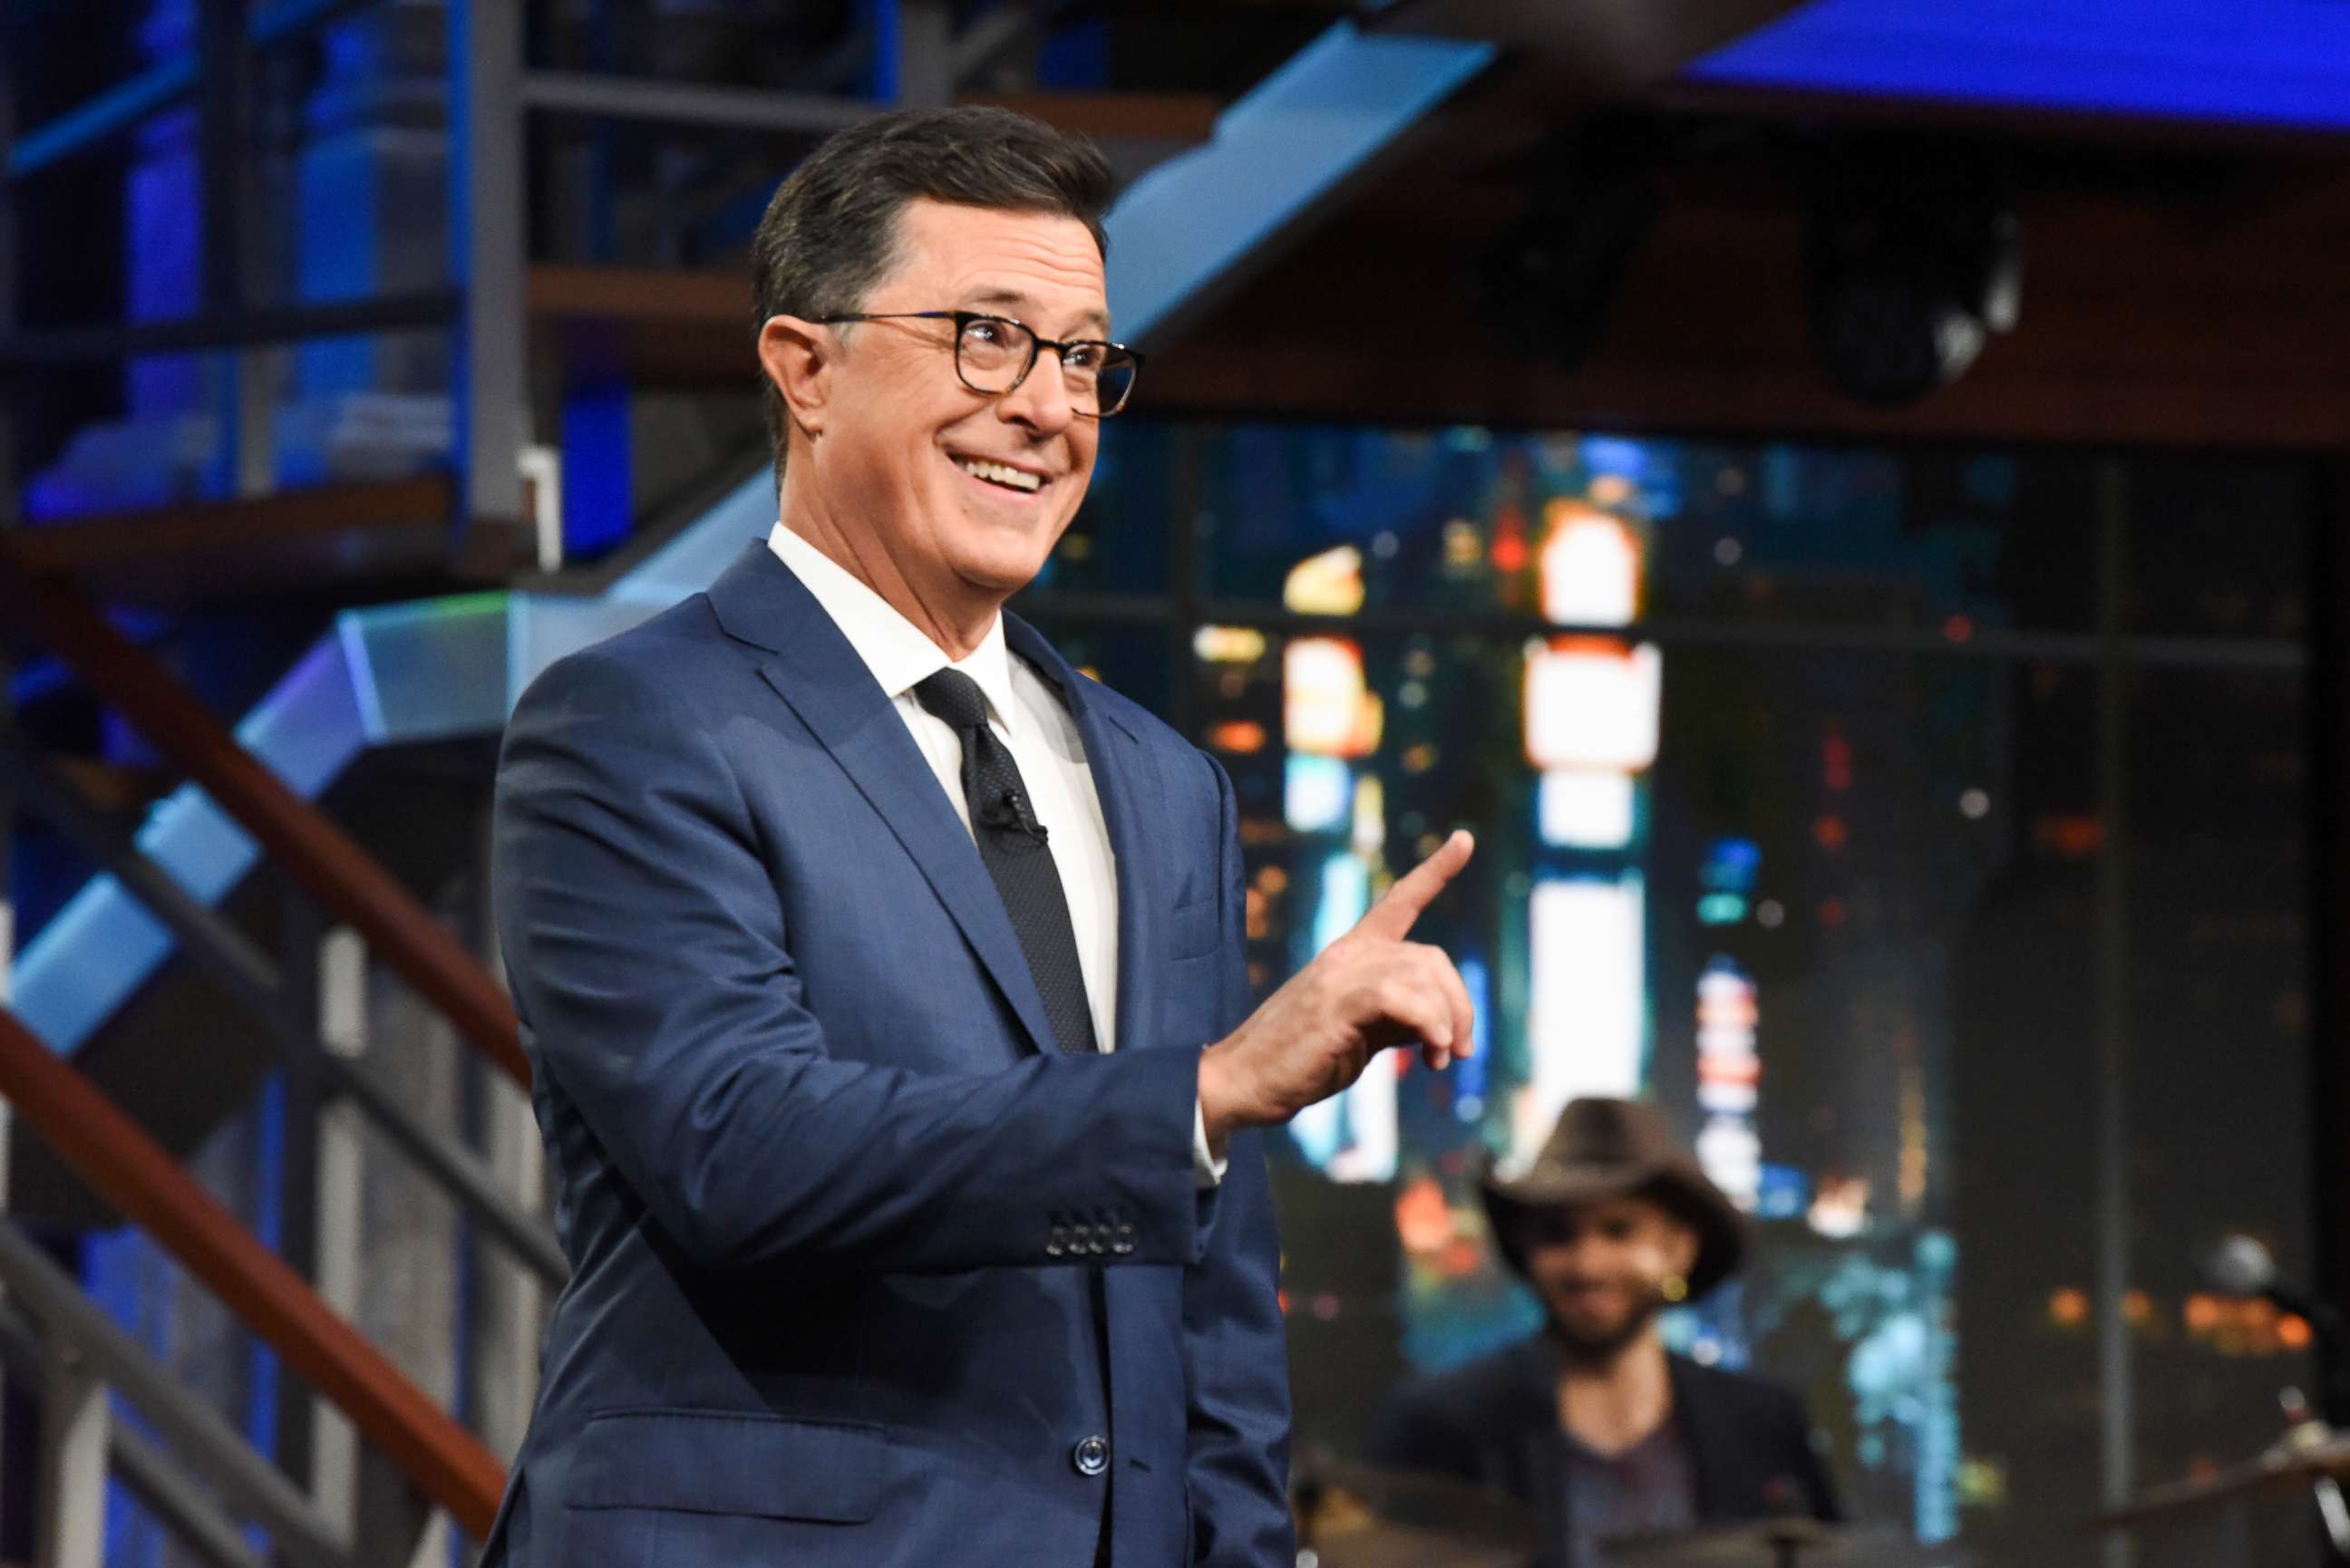 PHOTO: The Late Show with Stephen Colbert during Thursday's July 19, 2018 show.